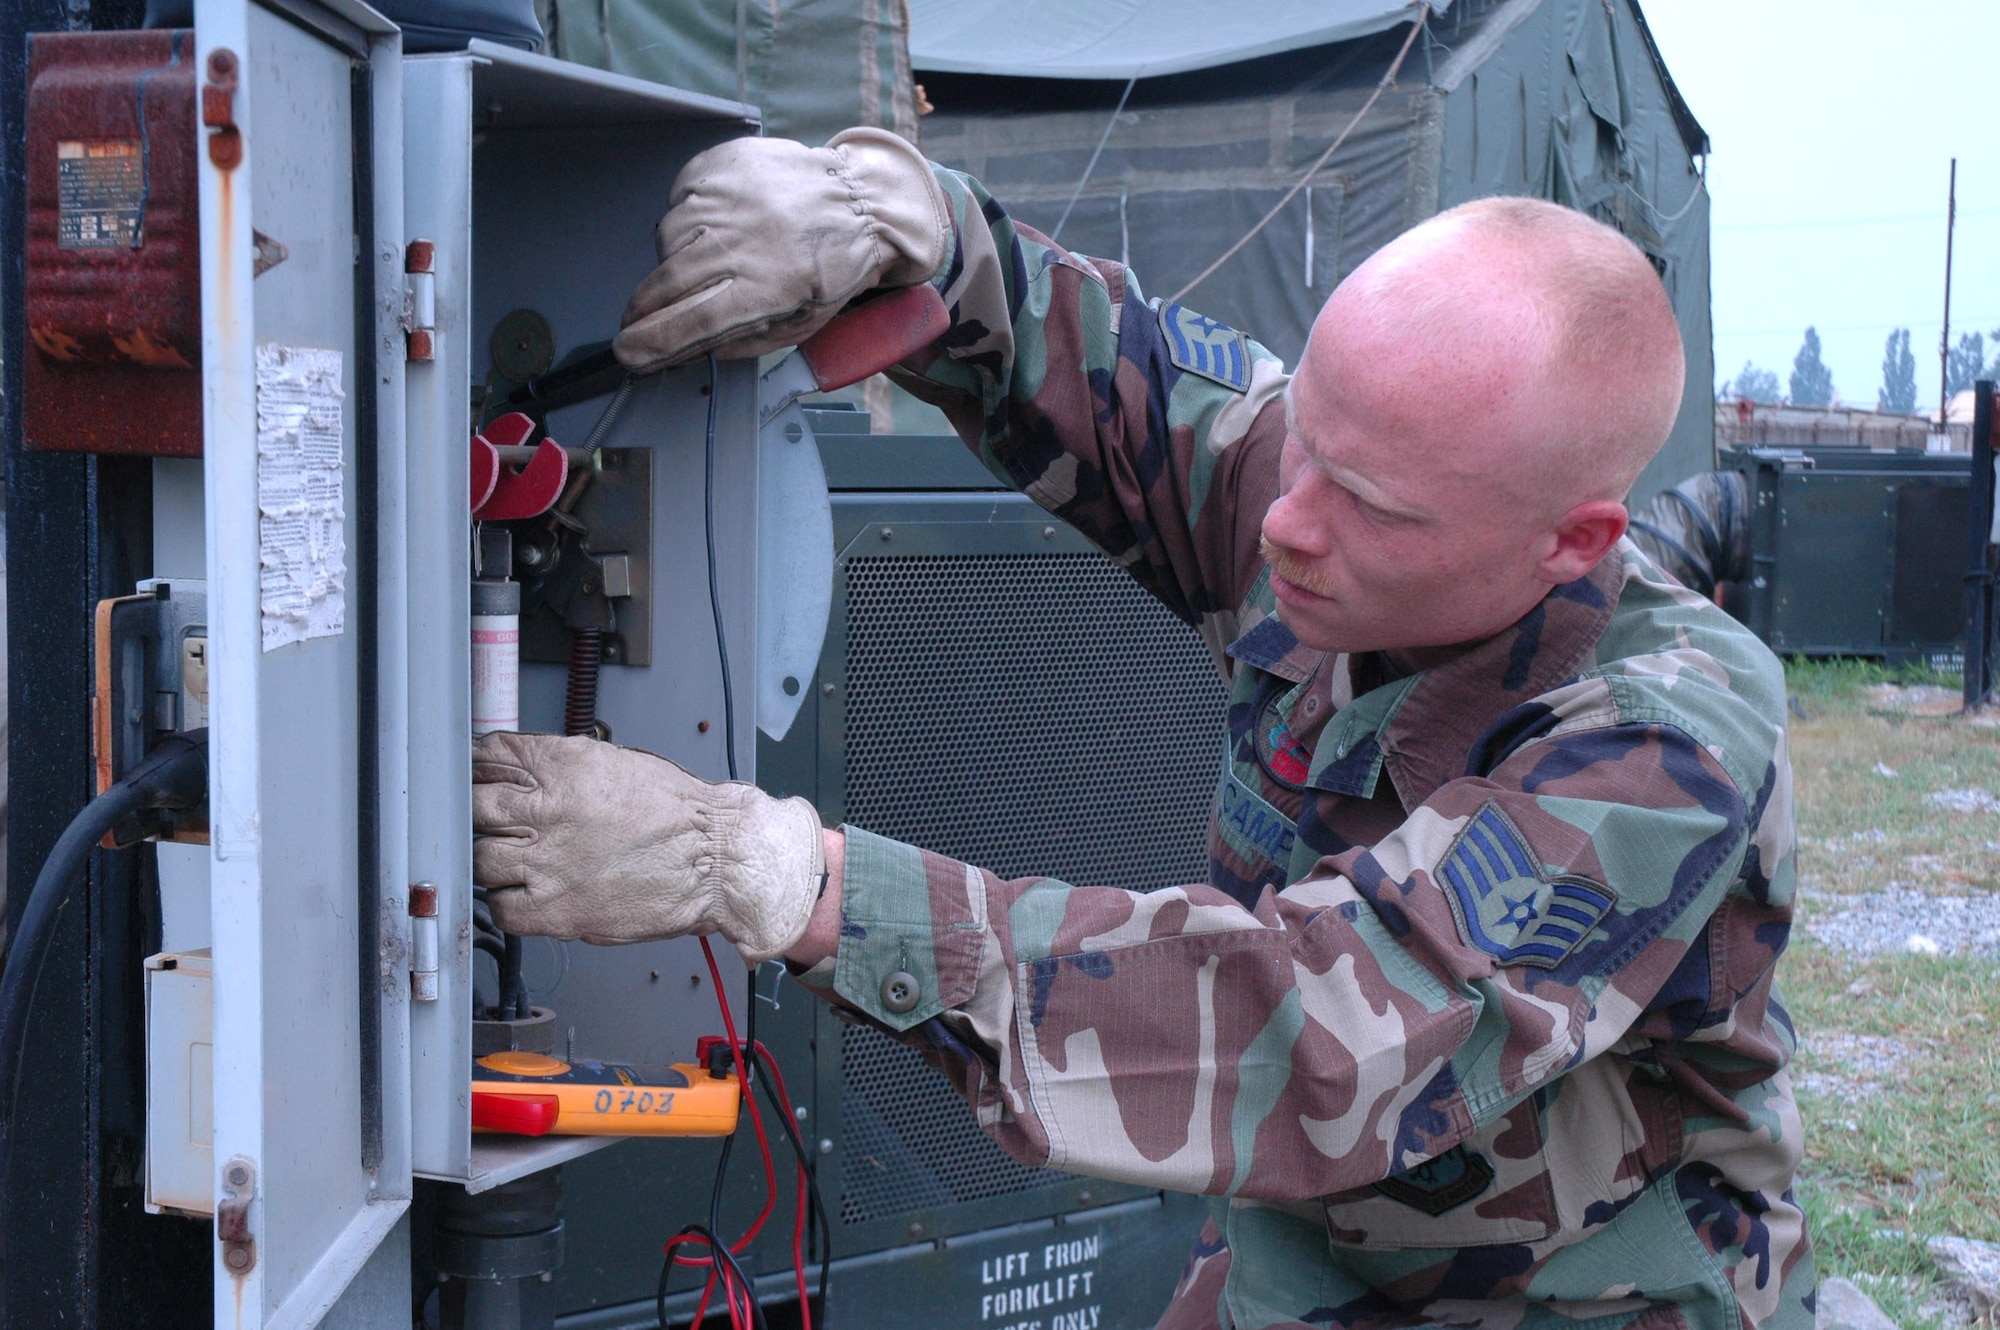 Staff Sgt. Eric Camp checks voltage and amperage usage on one of the tent city tents at Osan Air Base, South Korea, Aug. 24. Sergeant Camp is an electrical systems craftsman with the 51st Expeditionary Support Squadron deployed from Kadena AB, Japan, for Exercise Ulchi Focus Lens. (U.S. Air Force photo/Senior Airman Brok McCarthy)